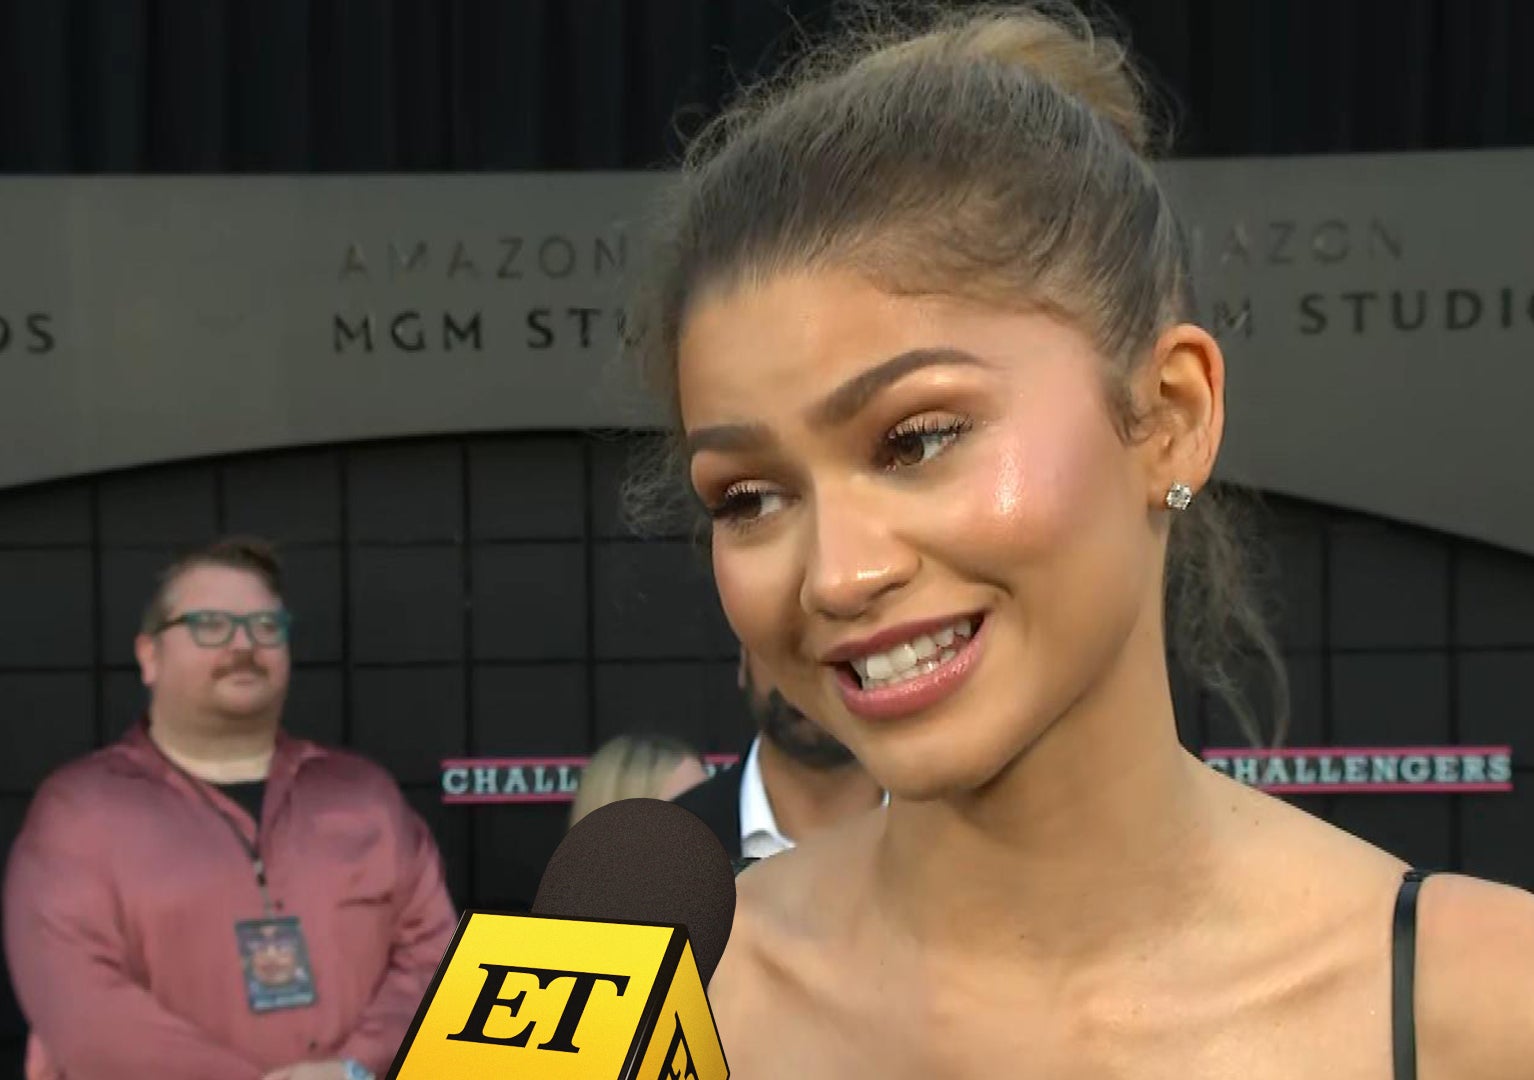 How Zendaya Feels Having Tom Holland's Support During ‘Challengers’ Press Tour (Exclusive)